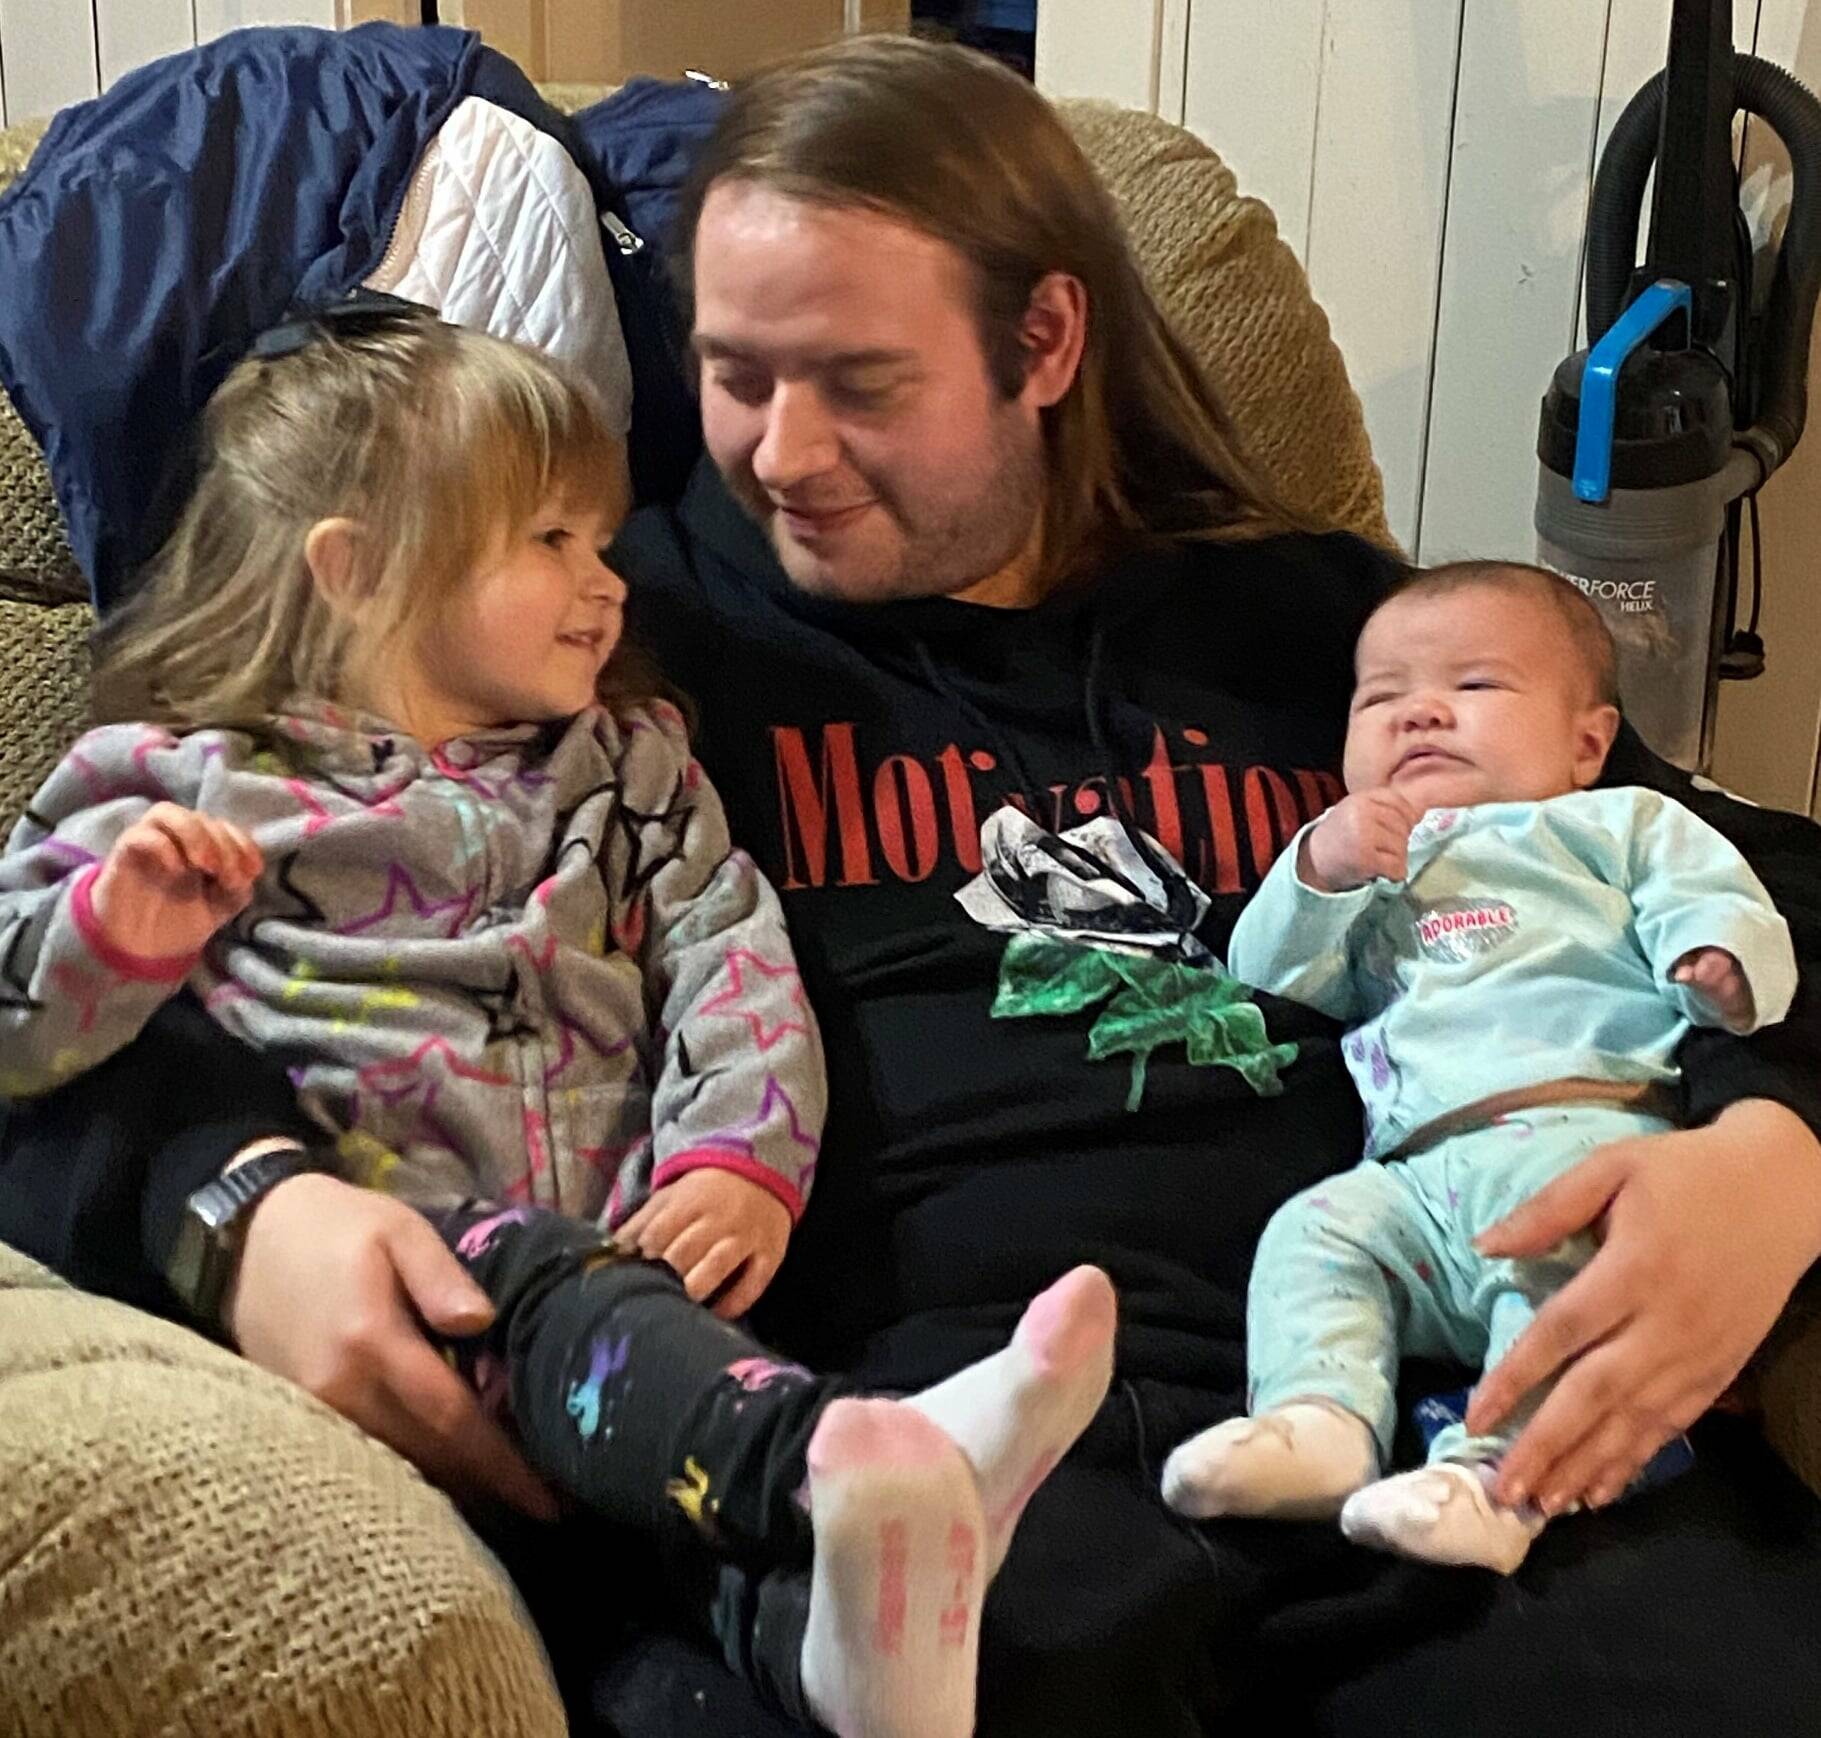 Armando Carlos Reyes, the man who was killed Monday Feb. 28, at Oceanside Motel, in Hoquiam, seen in an undated photo with his two young children. (Provided photo)